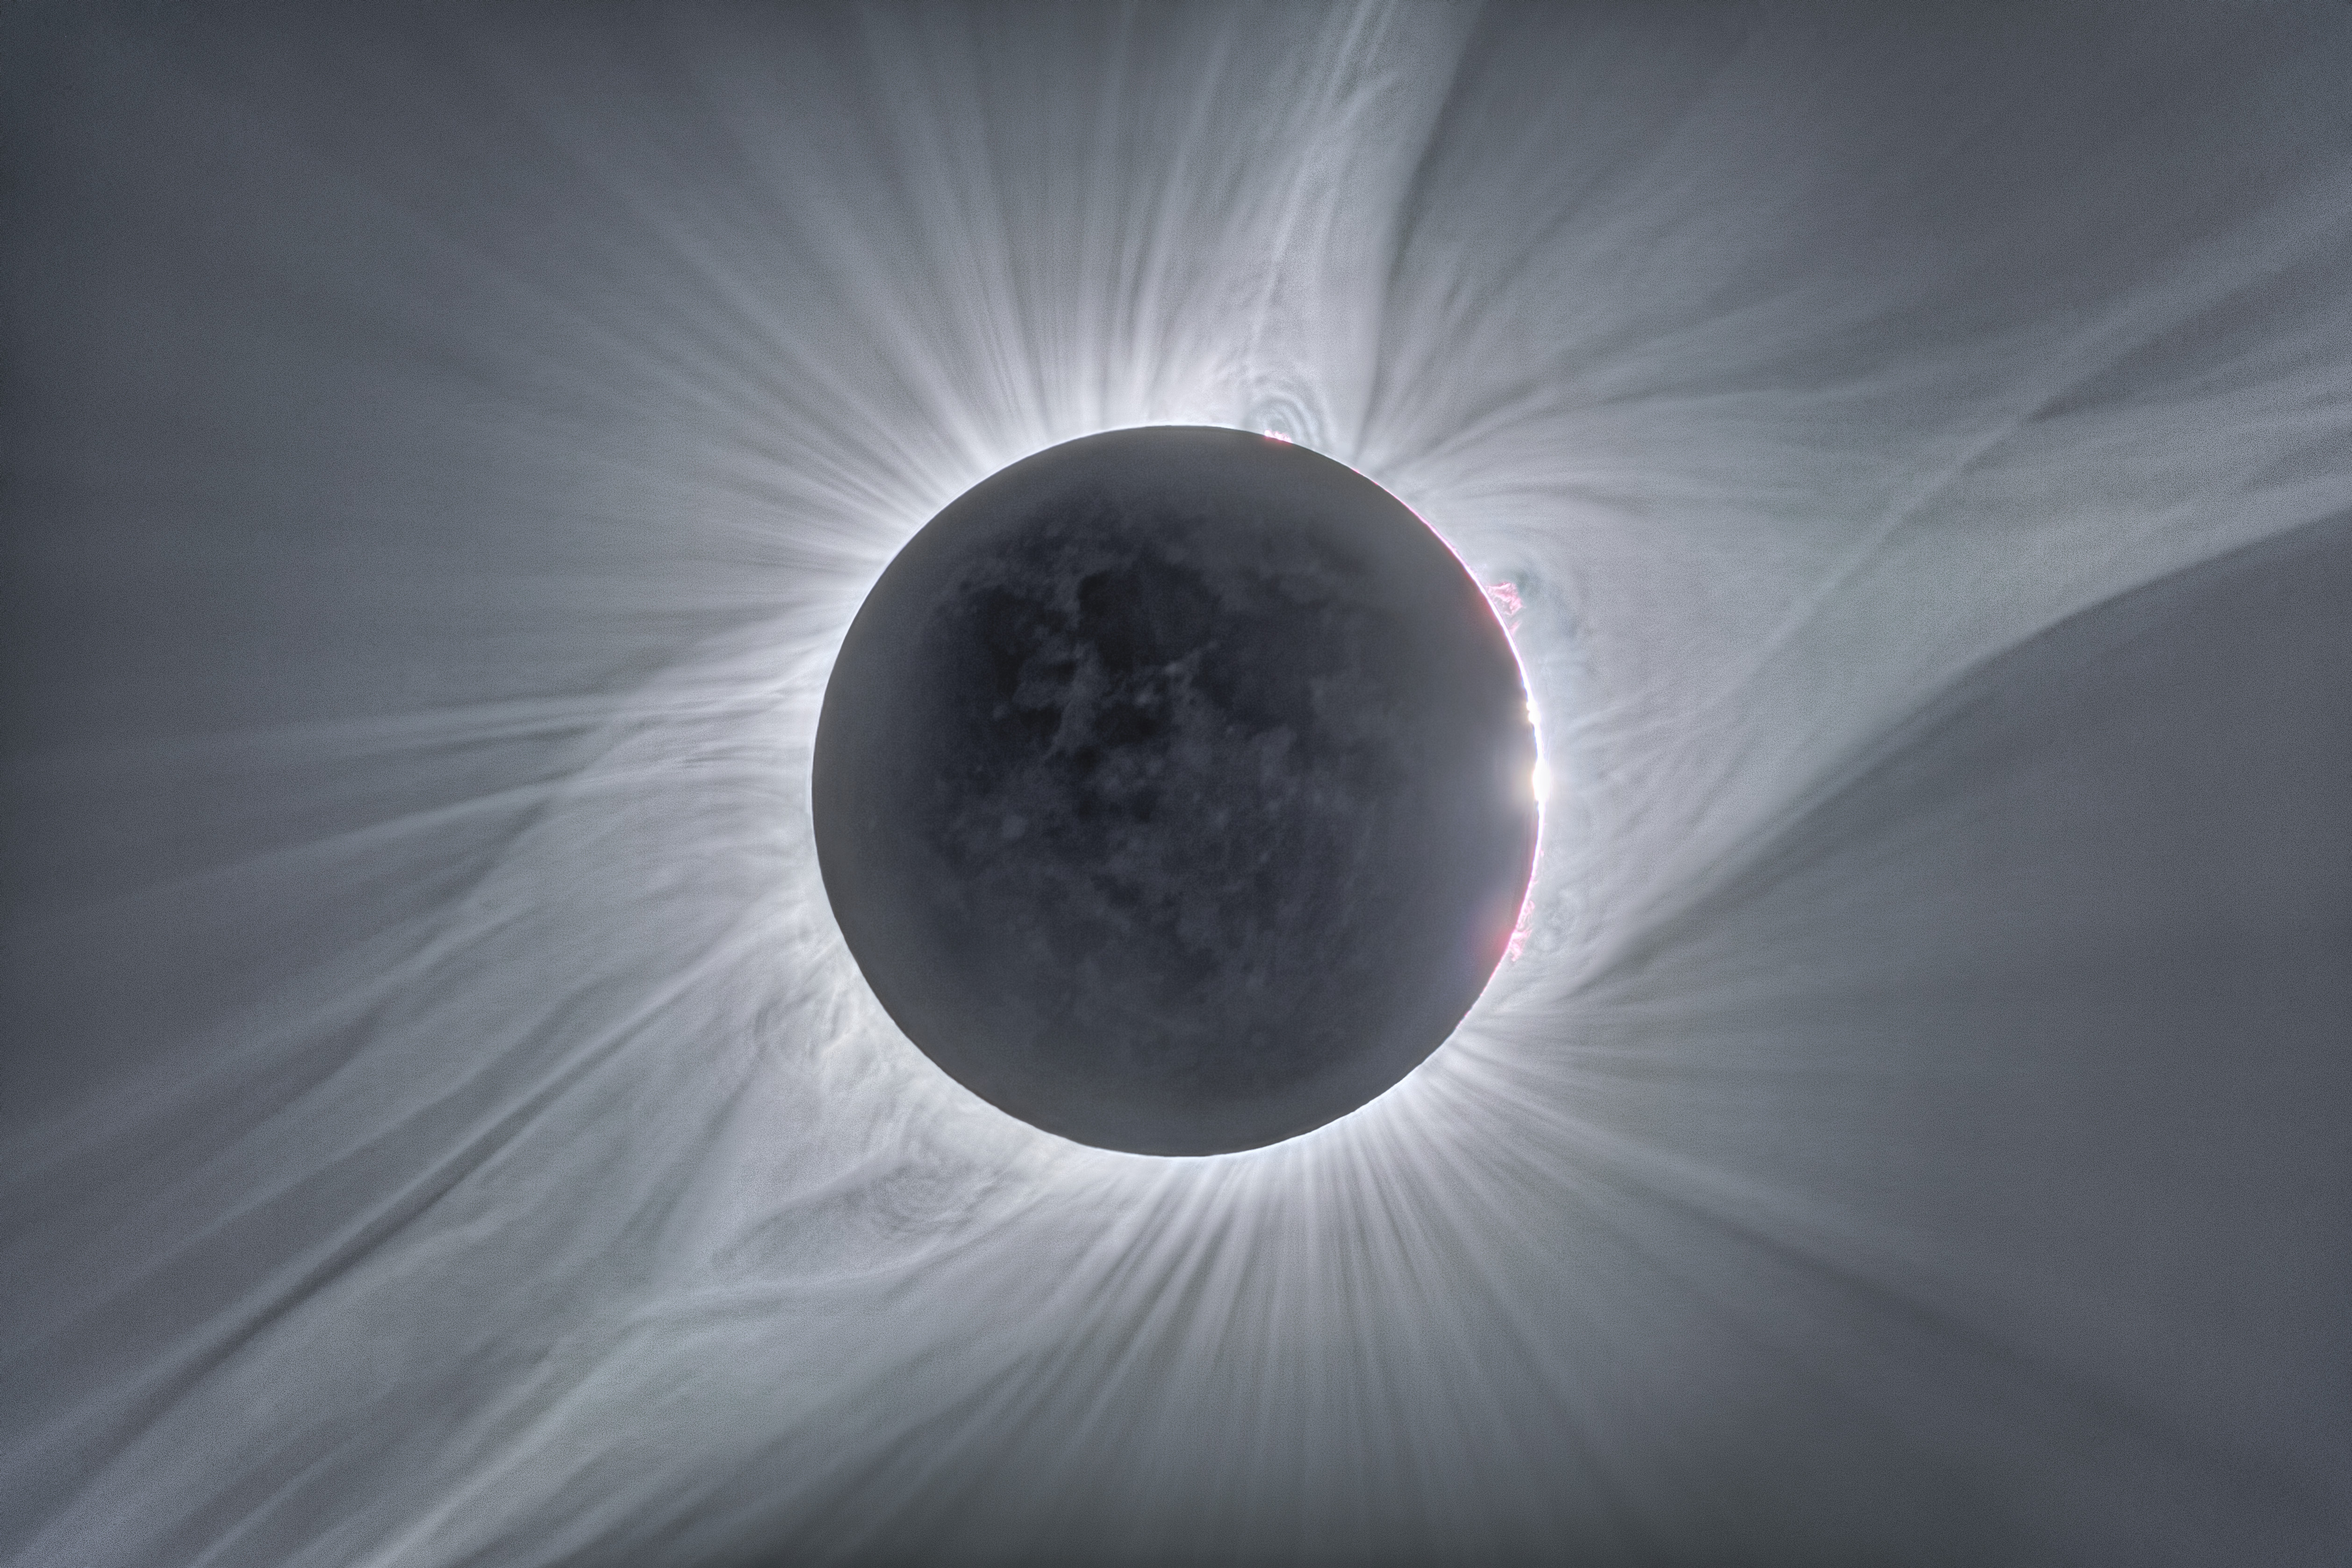 We're Tminus 4 years to the next Great American Solar Eclipse in 2024